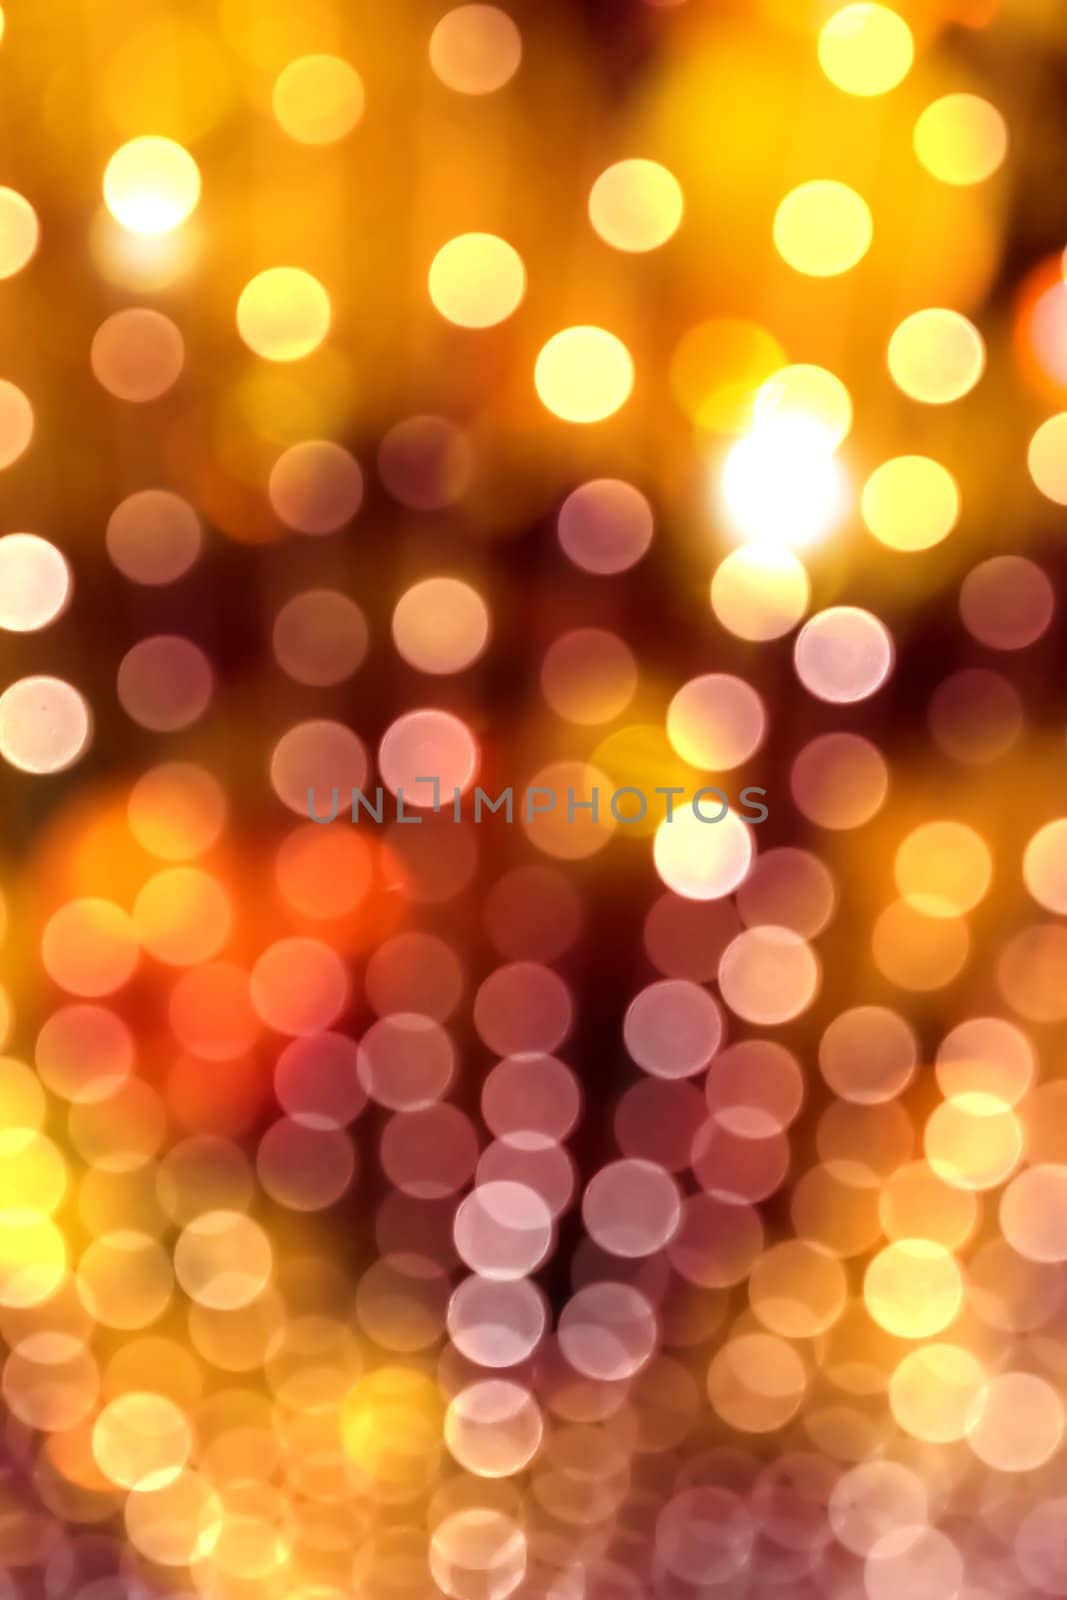 An abstract and colored background with glowing lights